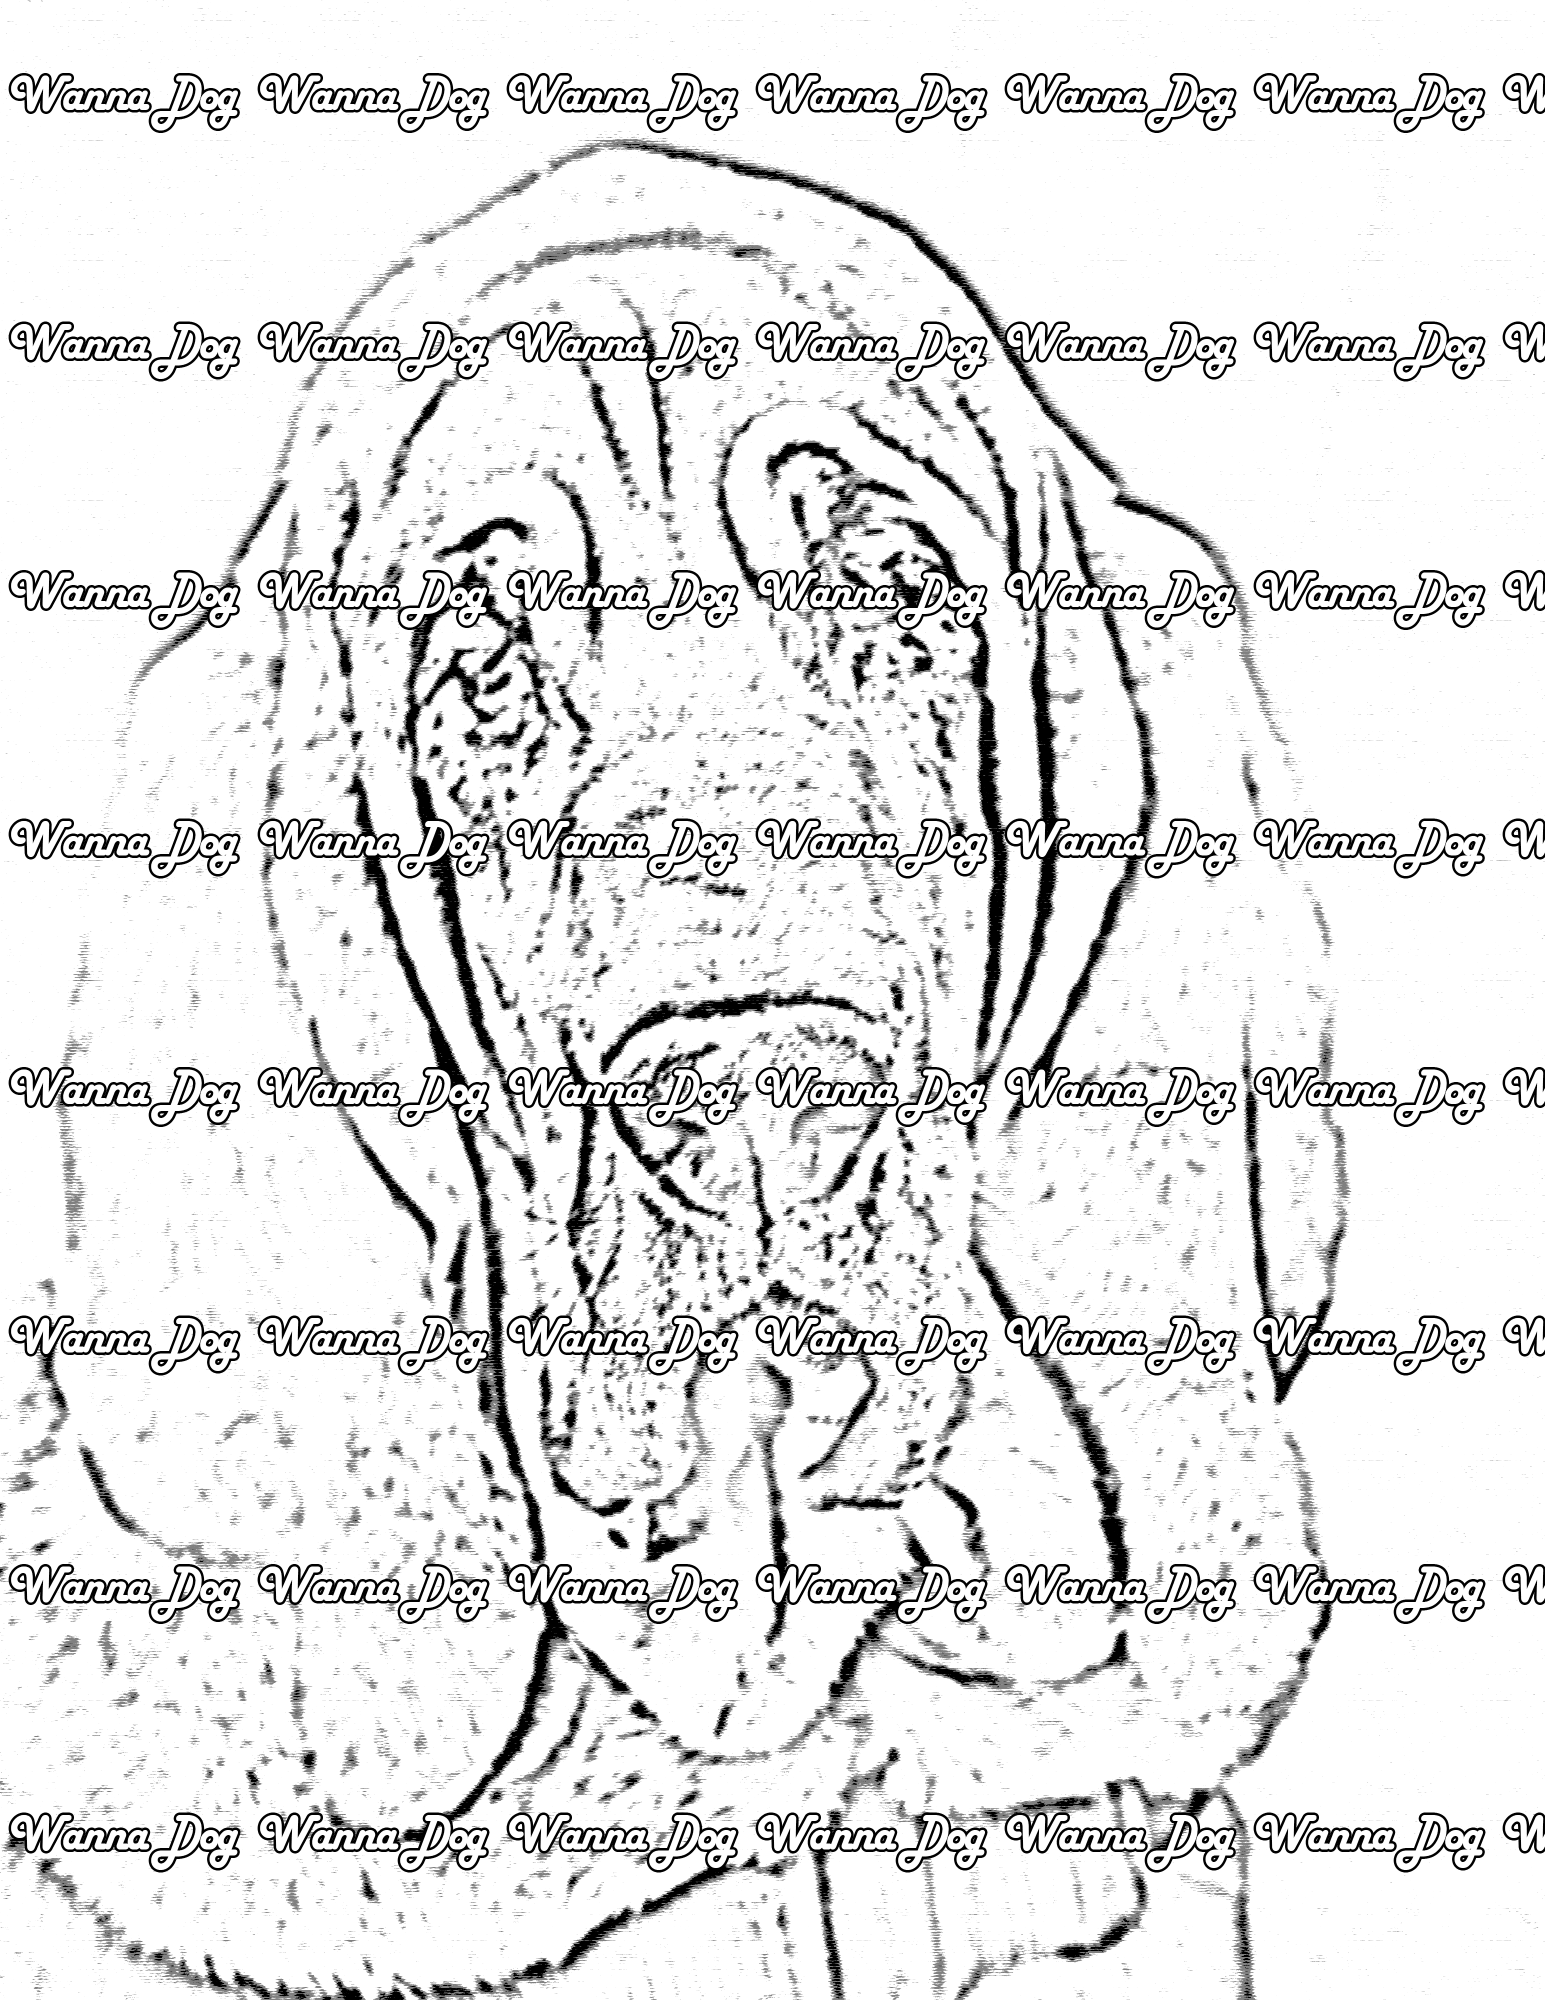 Bloodhound Coloring Page of a Bloodhound headshot